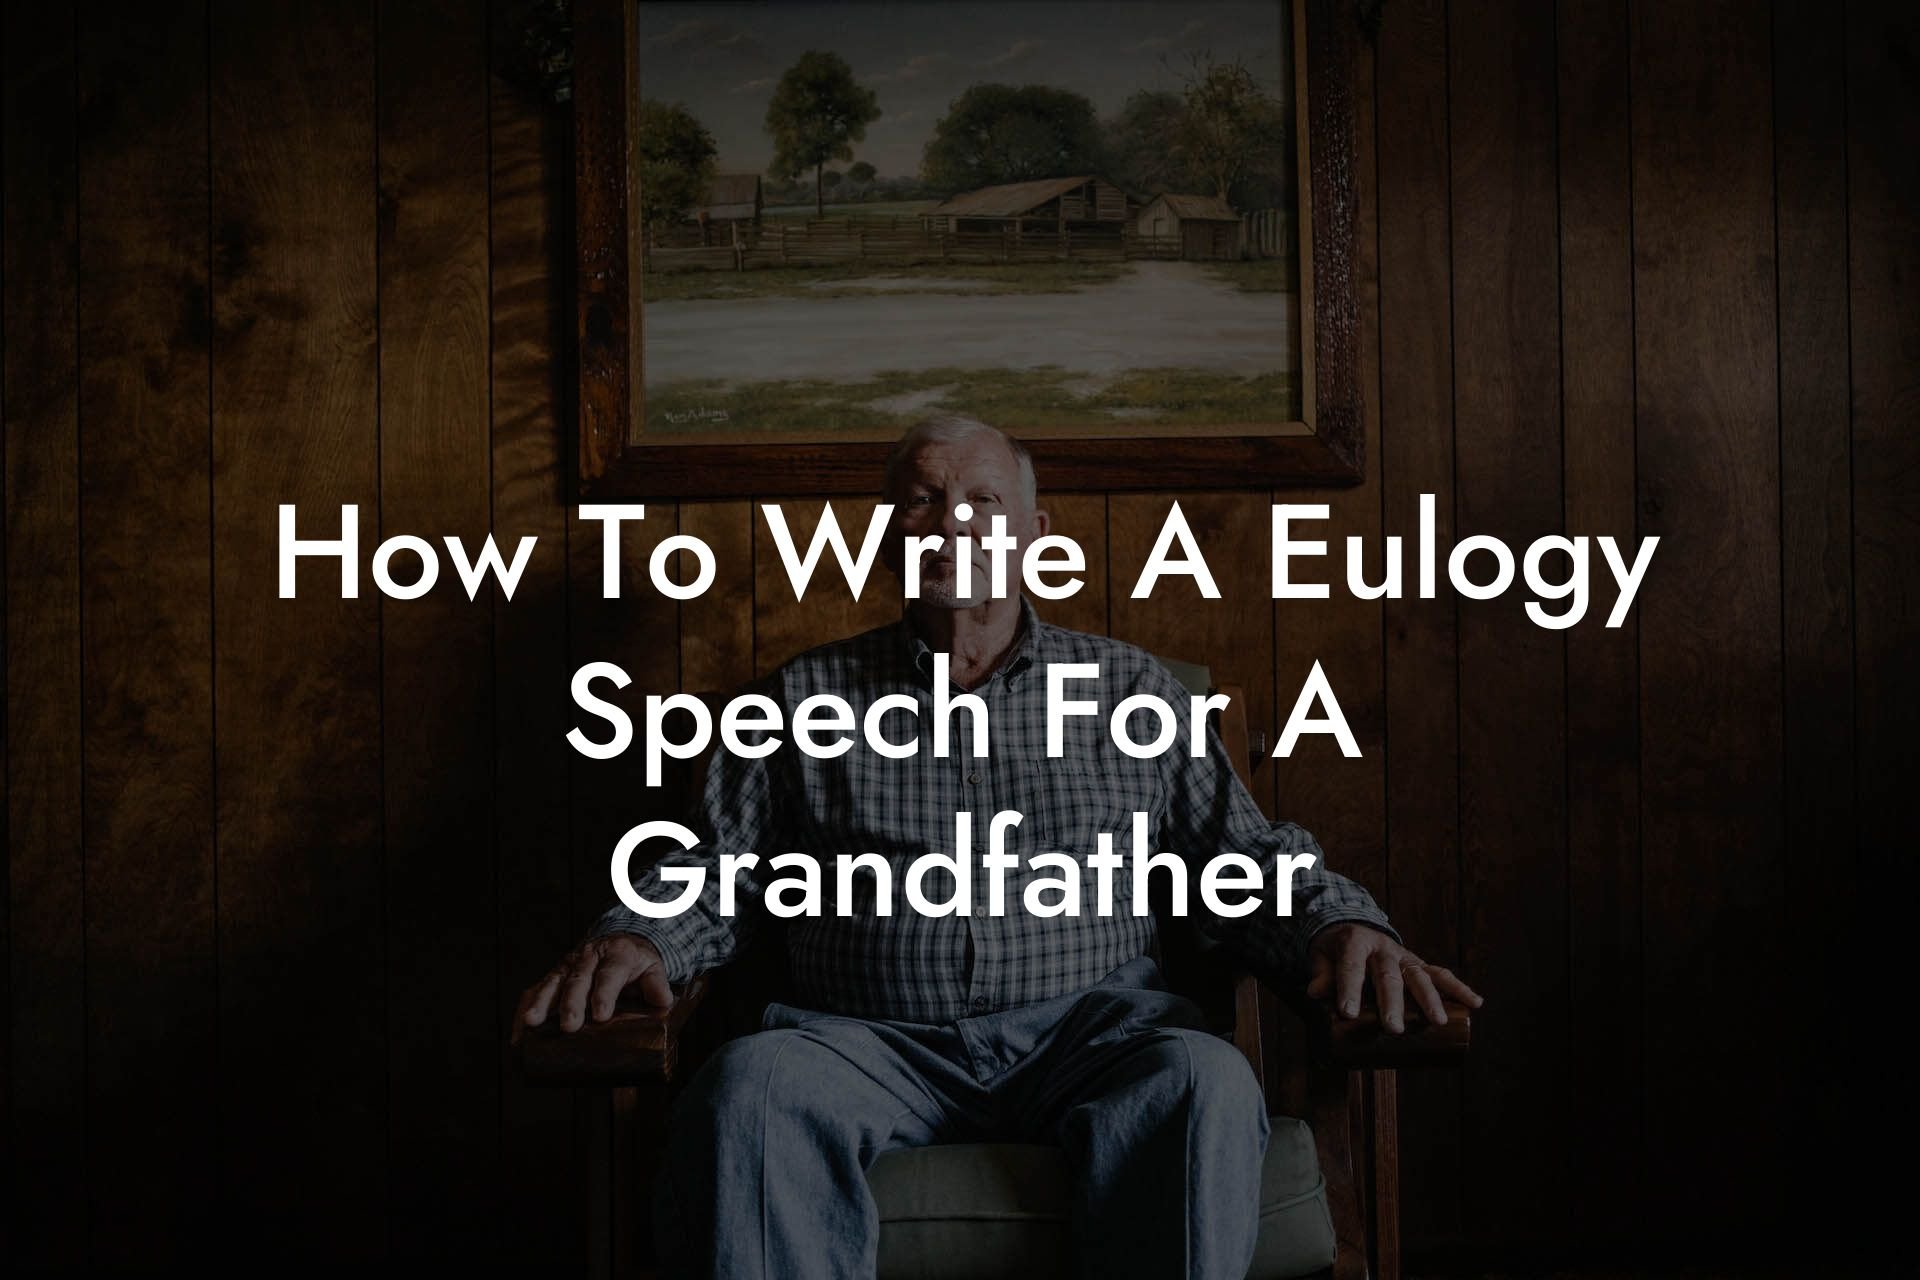 How To Write A Eulogy Speech For A Grandfather